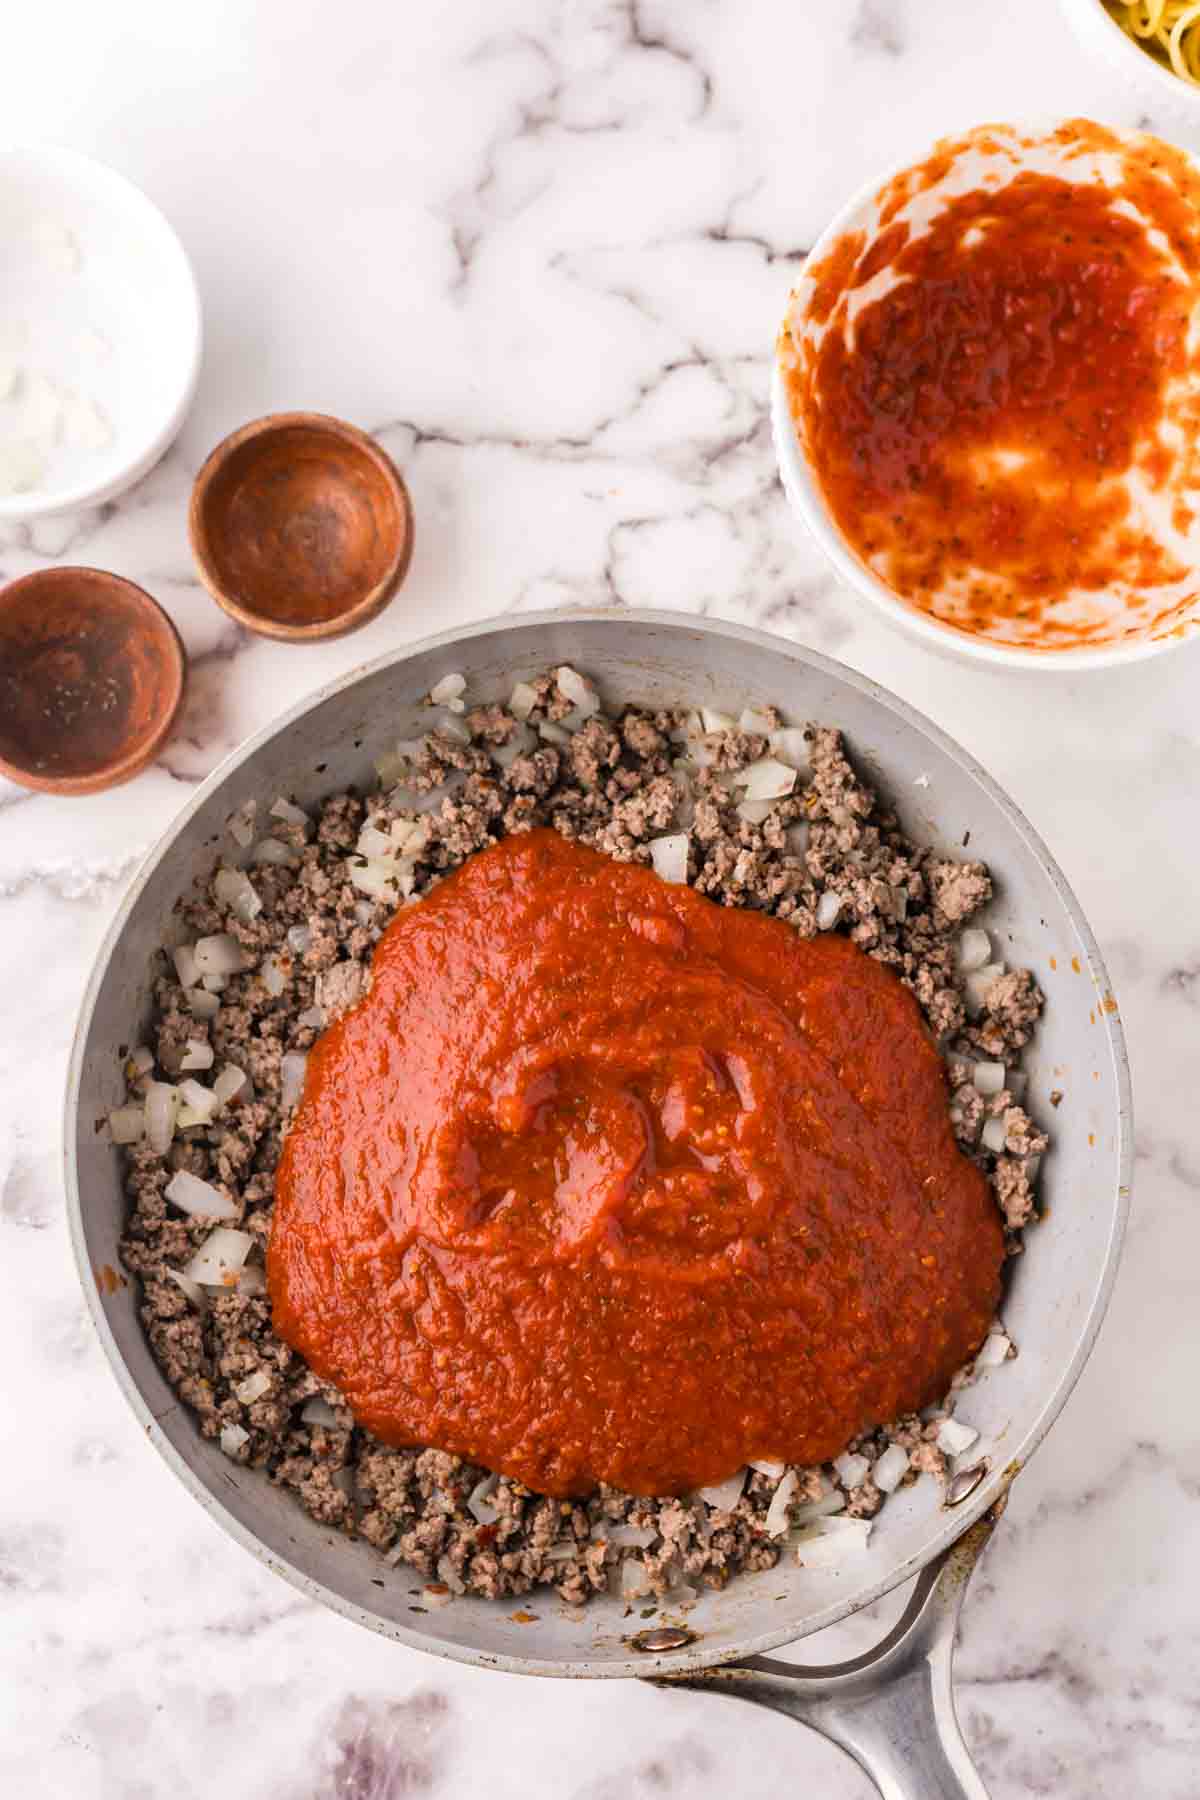 Red sauce added to a pan of browned ground beef.